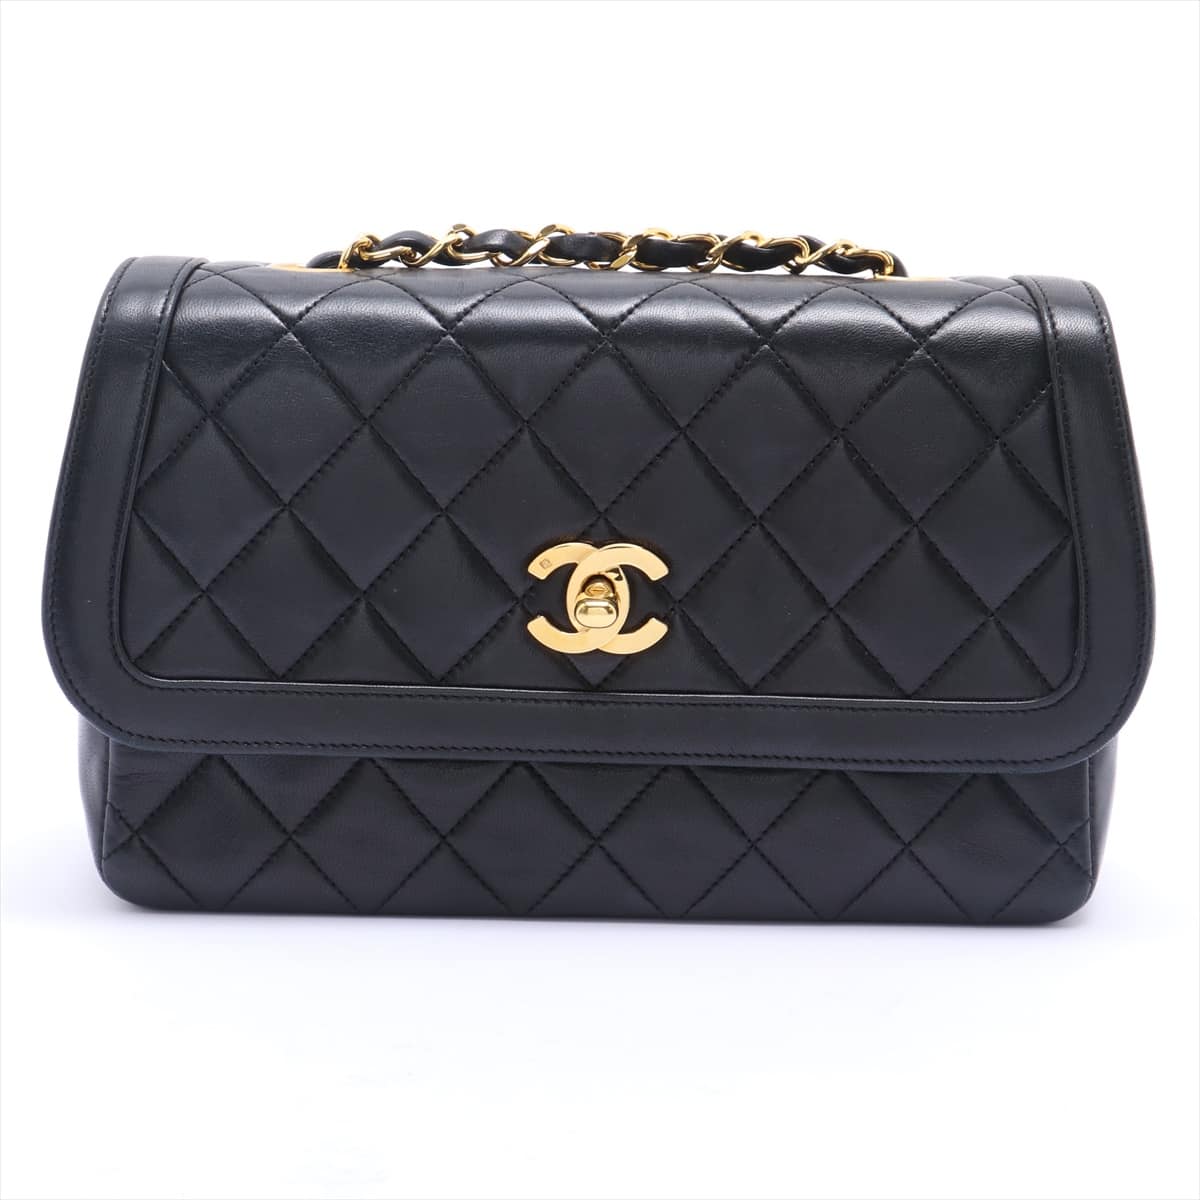 Chanel Matelasse Lambskin Single flap single chain bag Black Gold Metal fittings 1XXXXXX with pouch